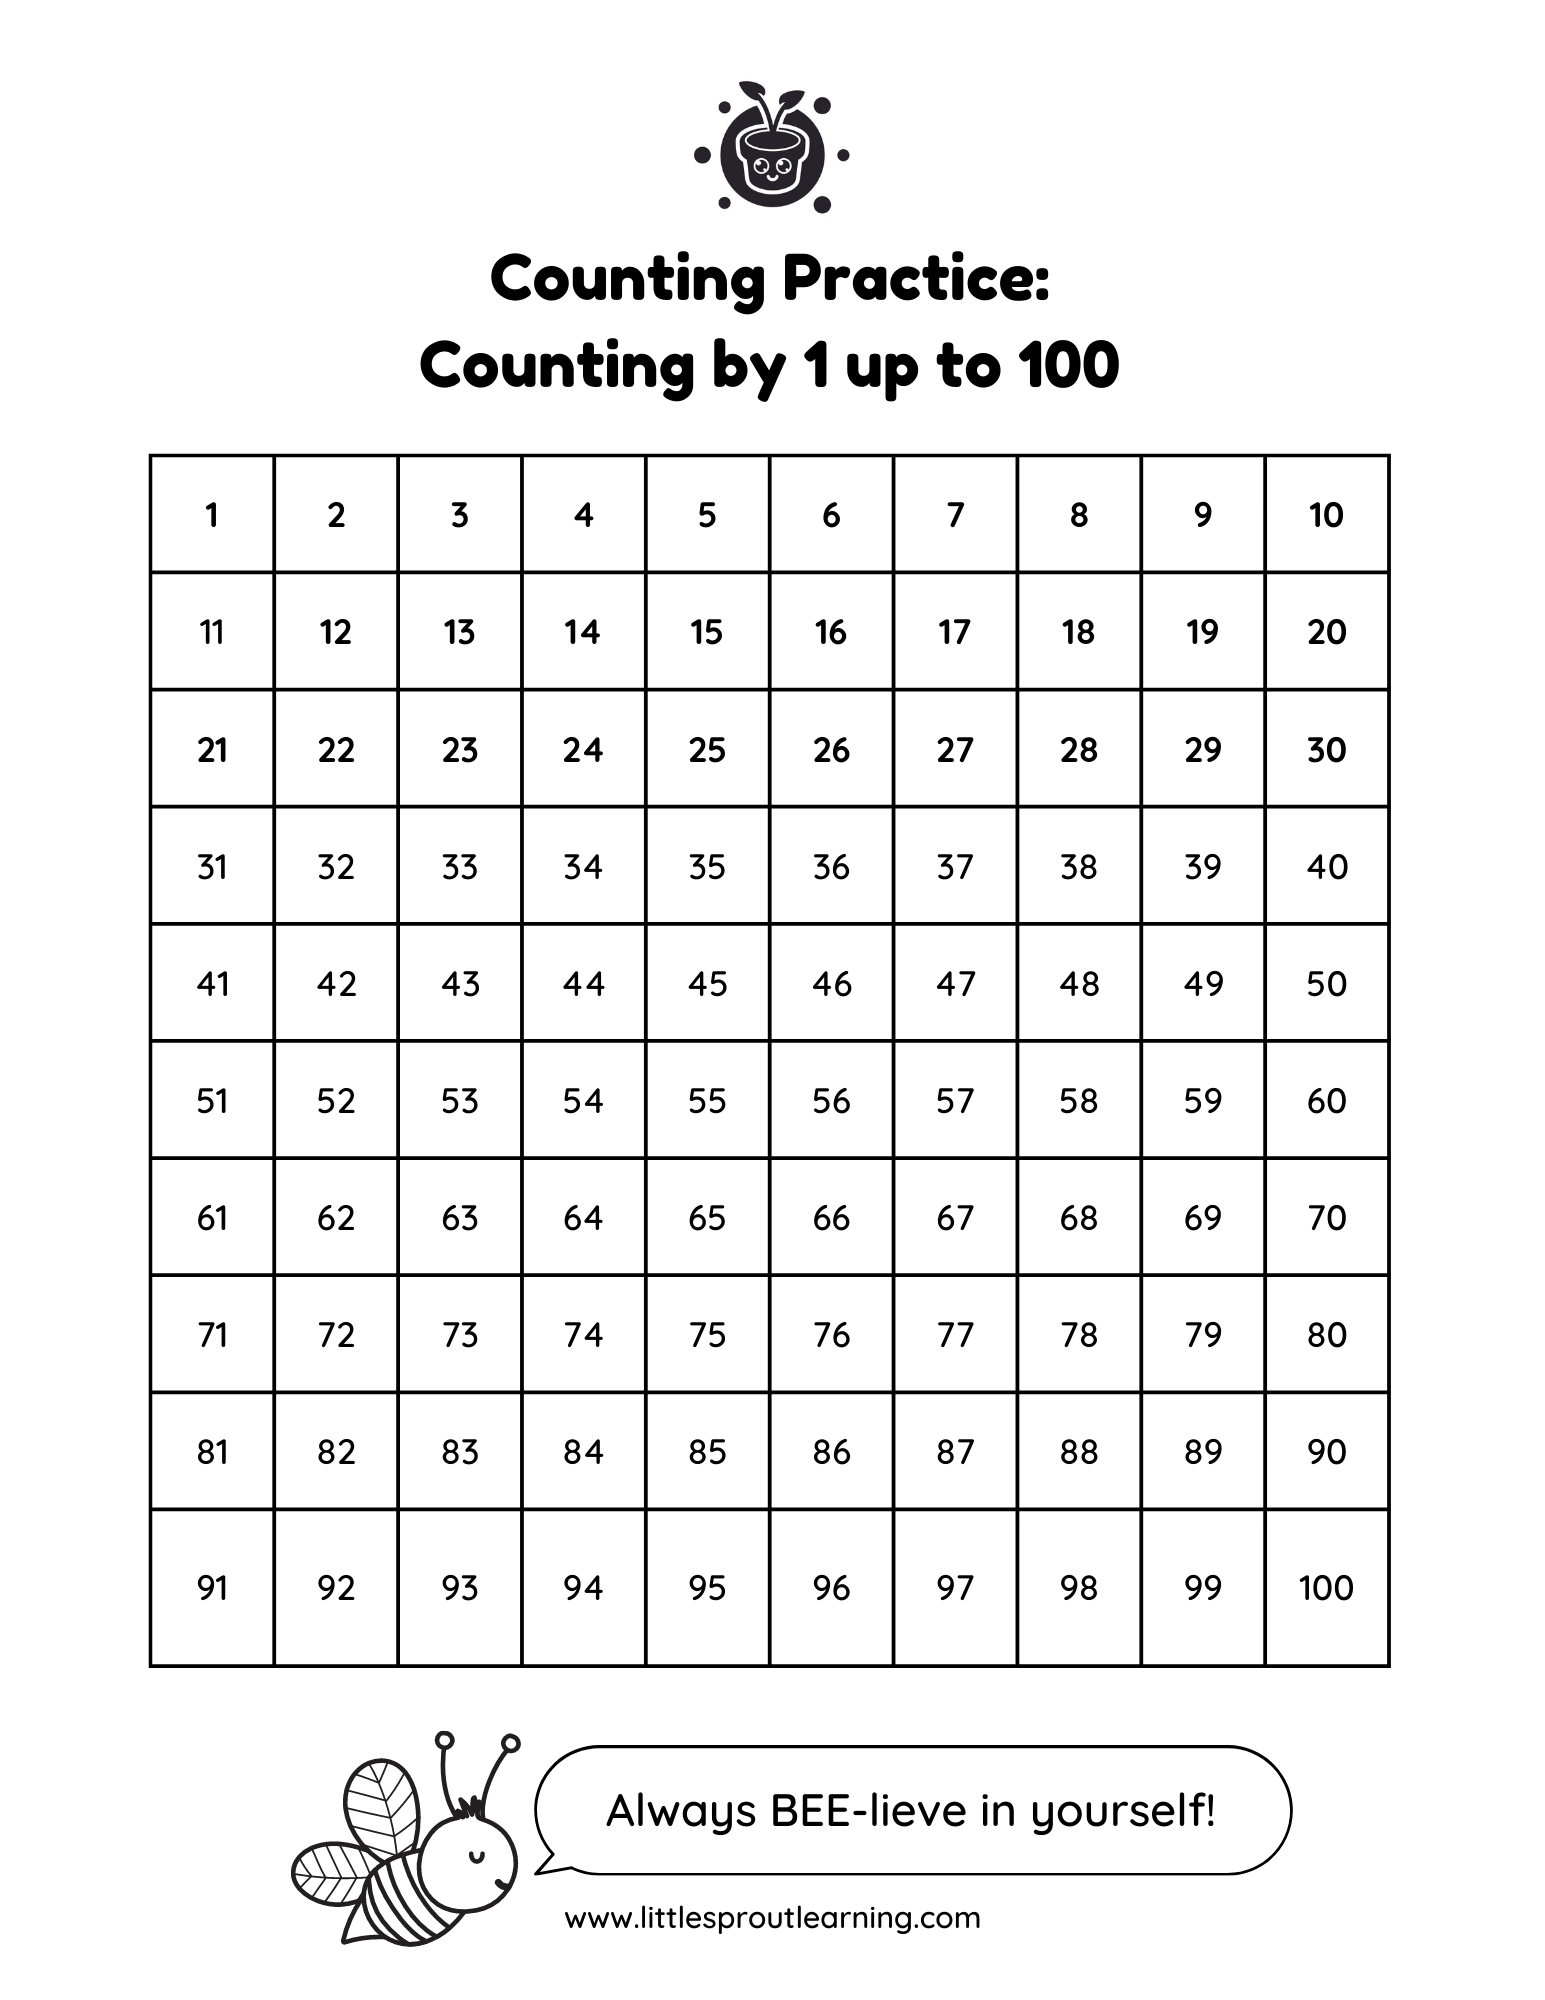 Counting Chart up to 100 by 1